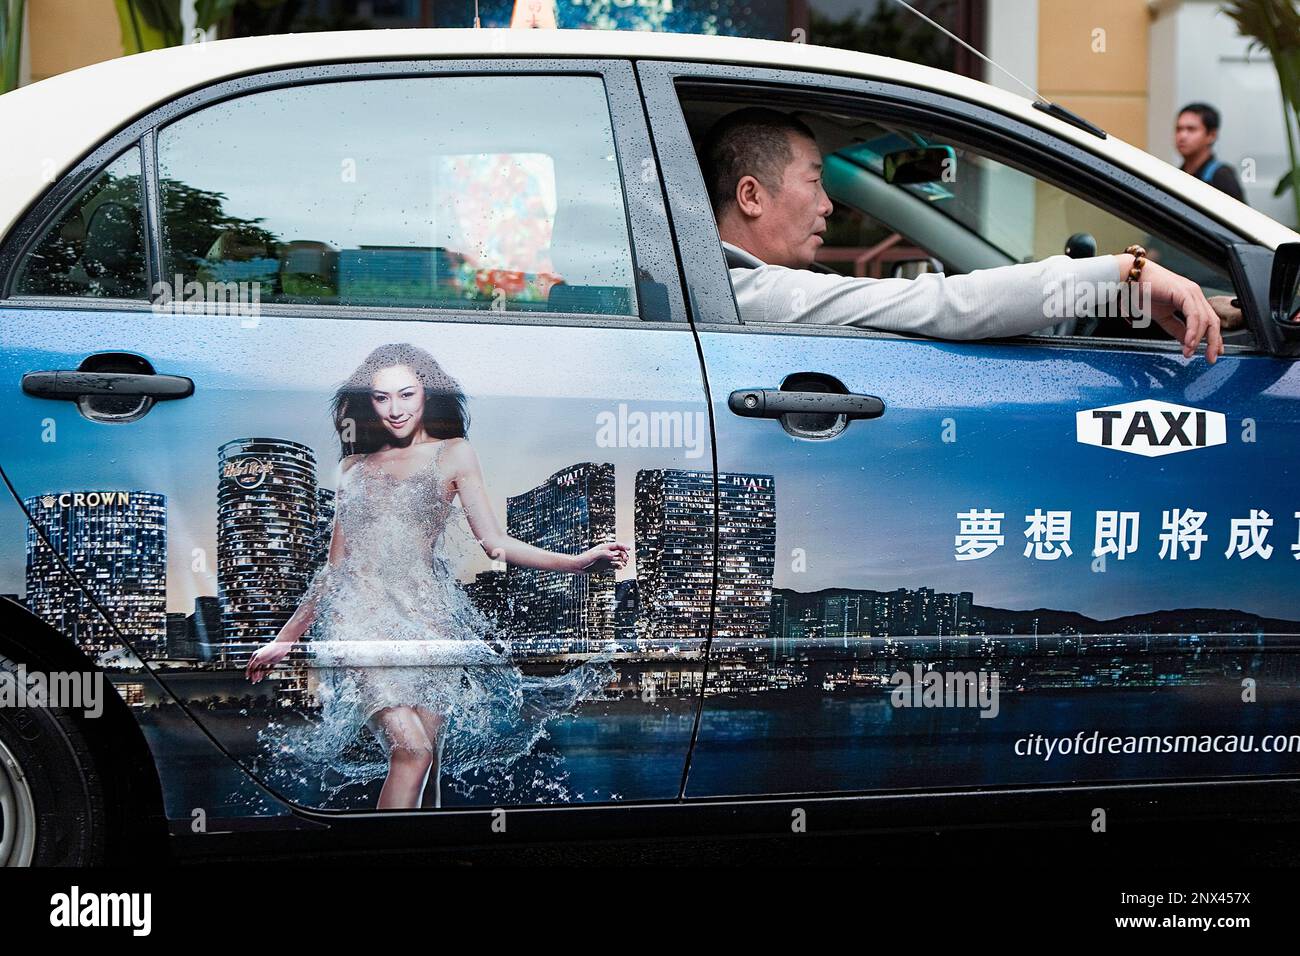 Taxi With advertisement of city of dreams,Macau,China Stock Photo